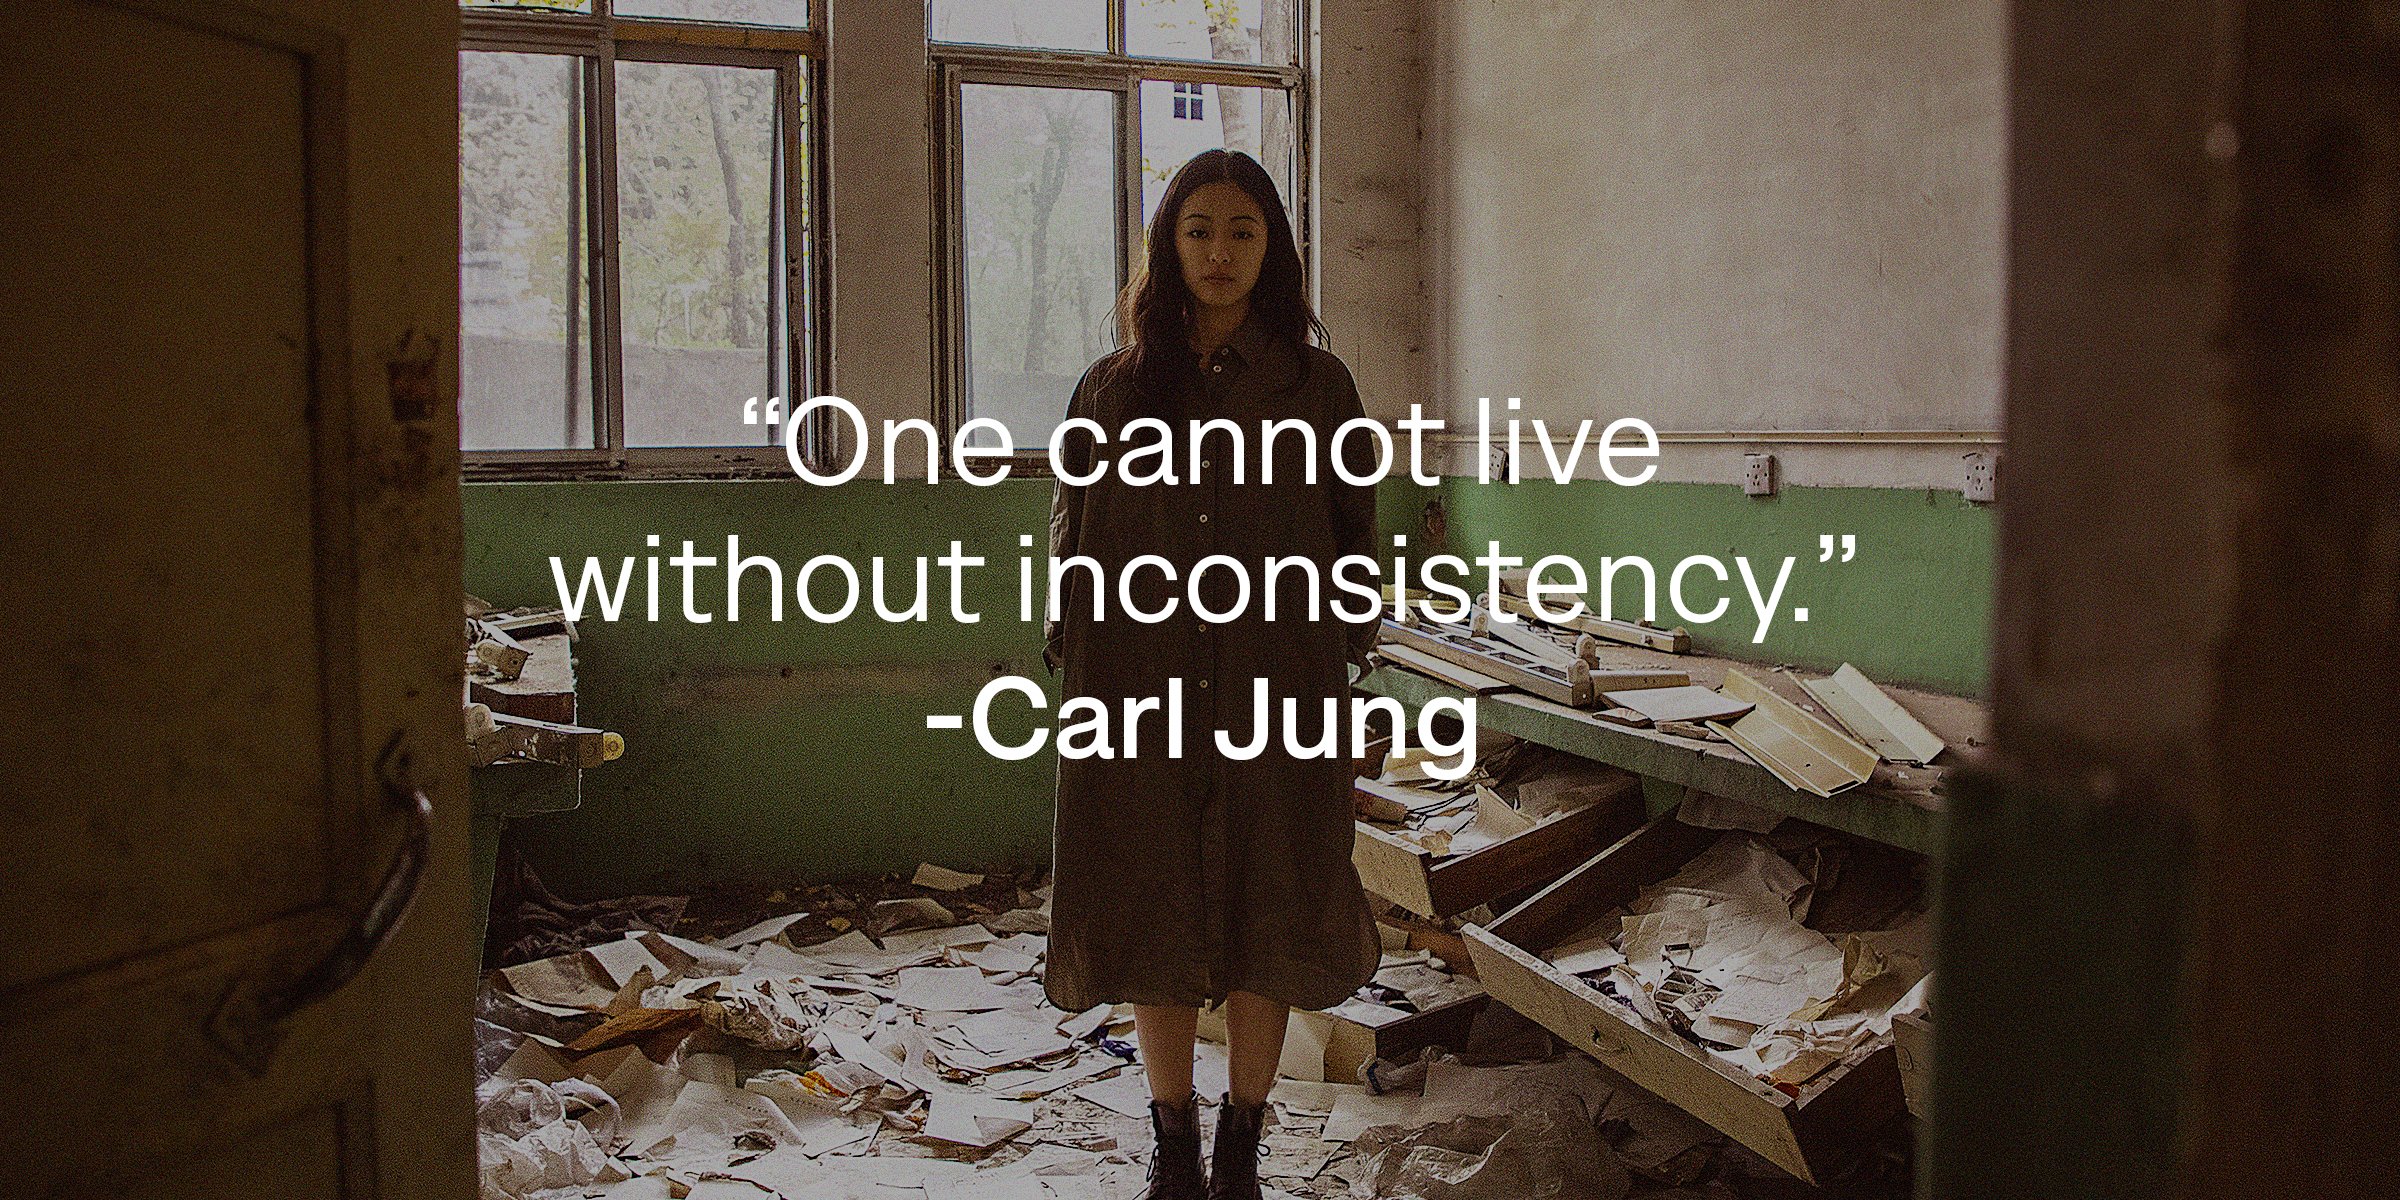 Source: Unsplash | Woman standing in a disorganized room with the quote: "One cannot live without inconsistency."